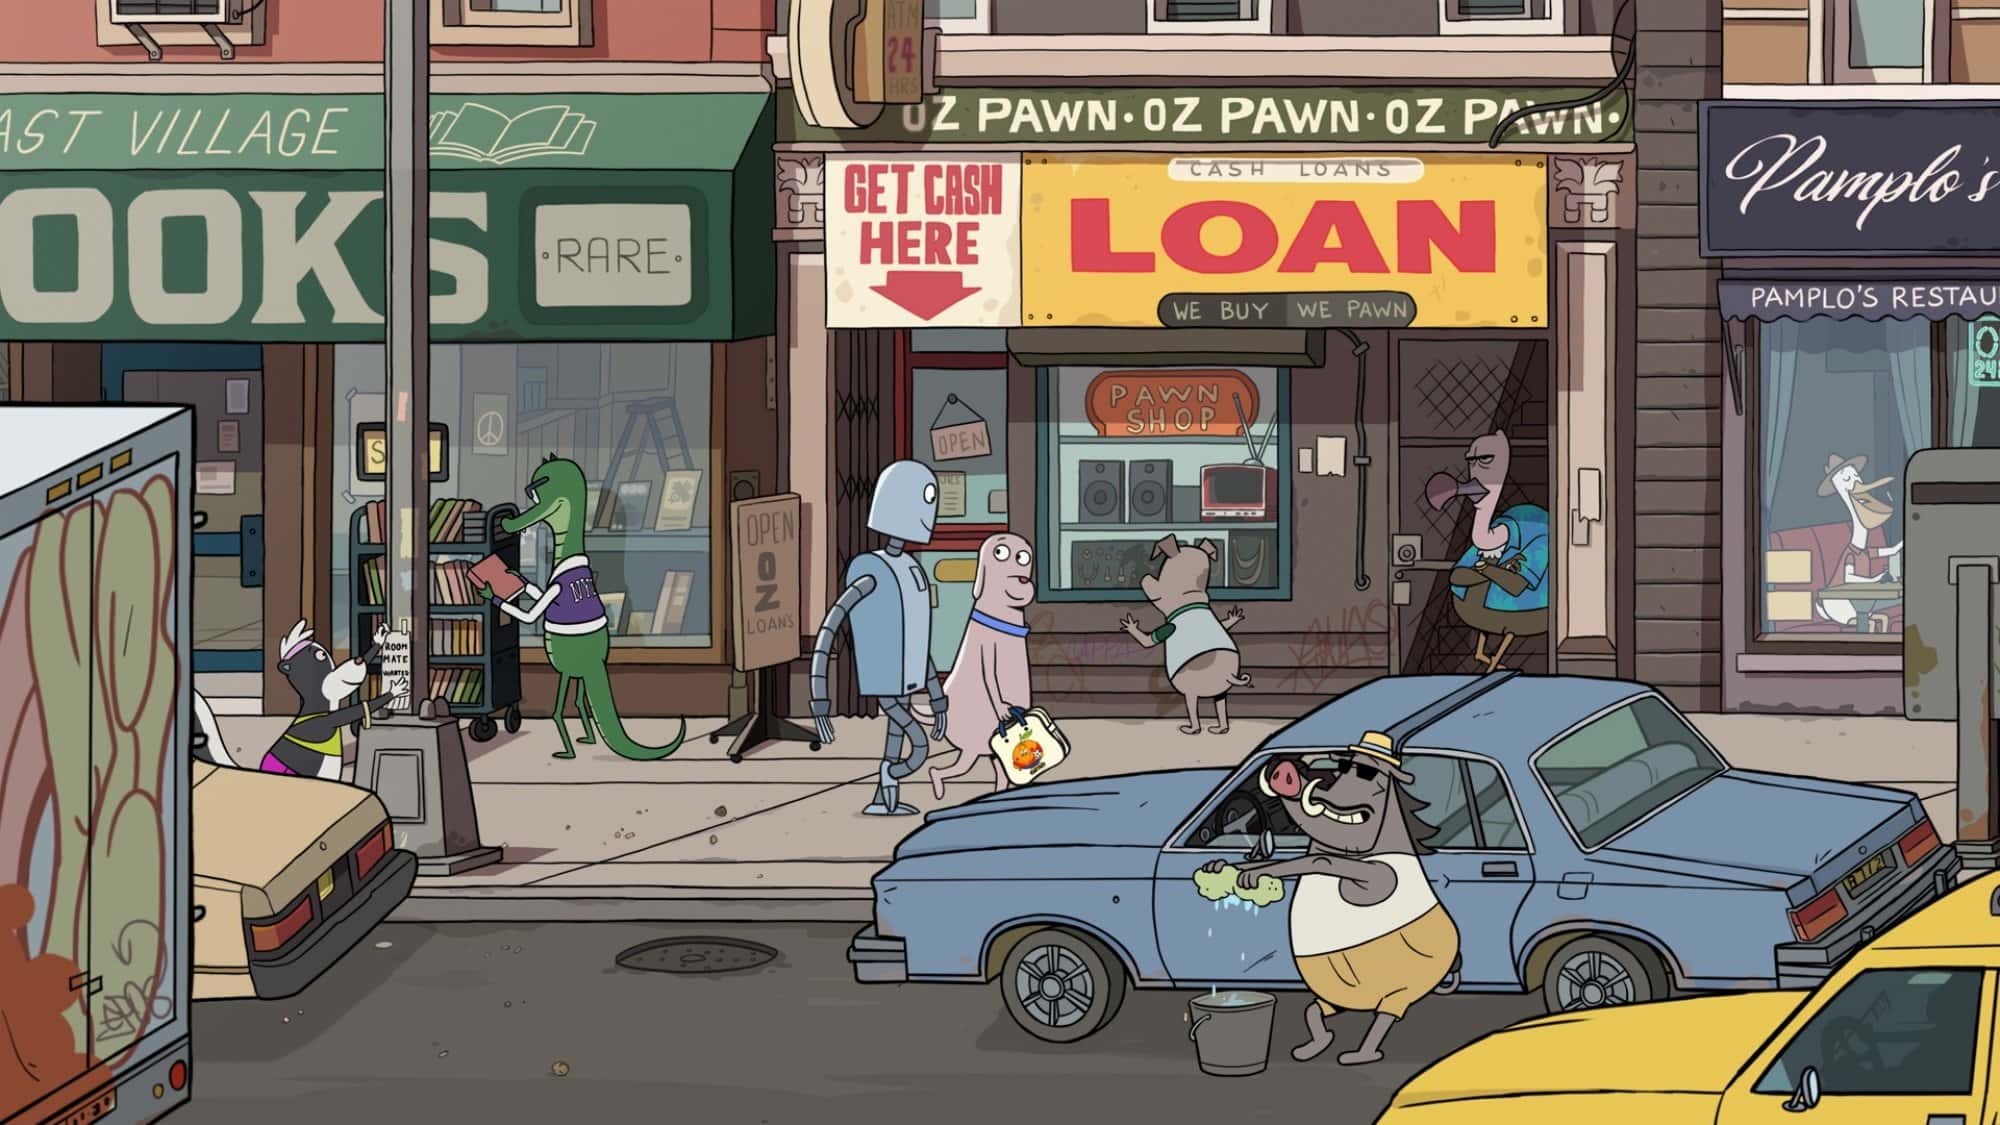 Robot Dreams A Touching Animated Story of 1980s New York and Unlikely Friendship